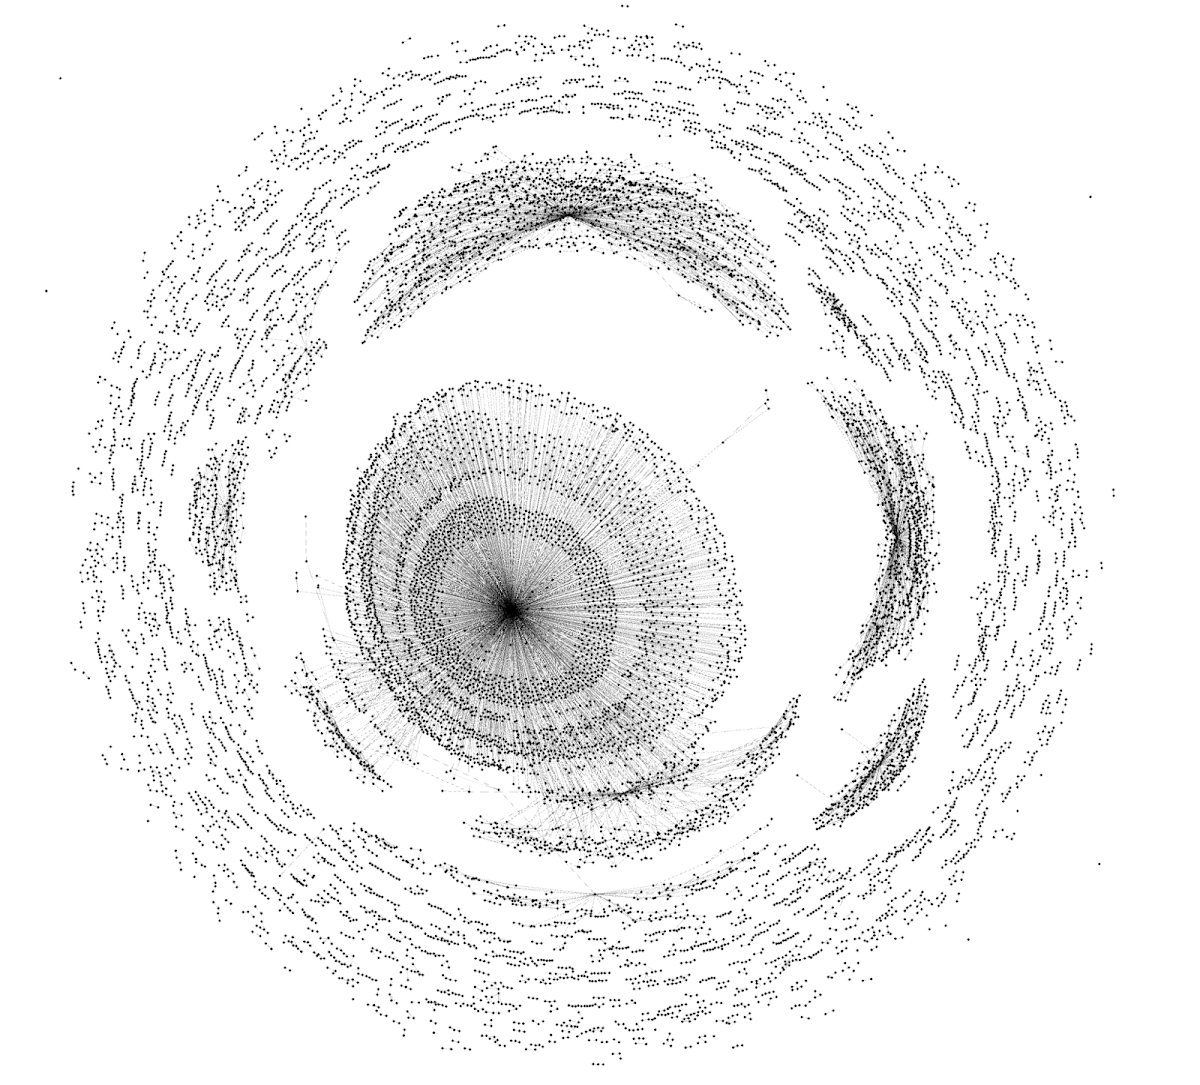 A graph rendering of the sandbox escape NSExpression payload node graph, with an eerie similarity to a human eye